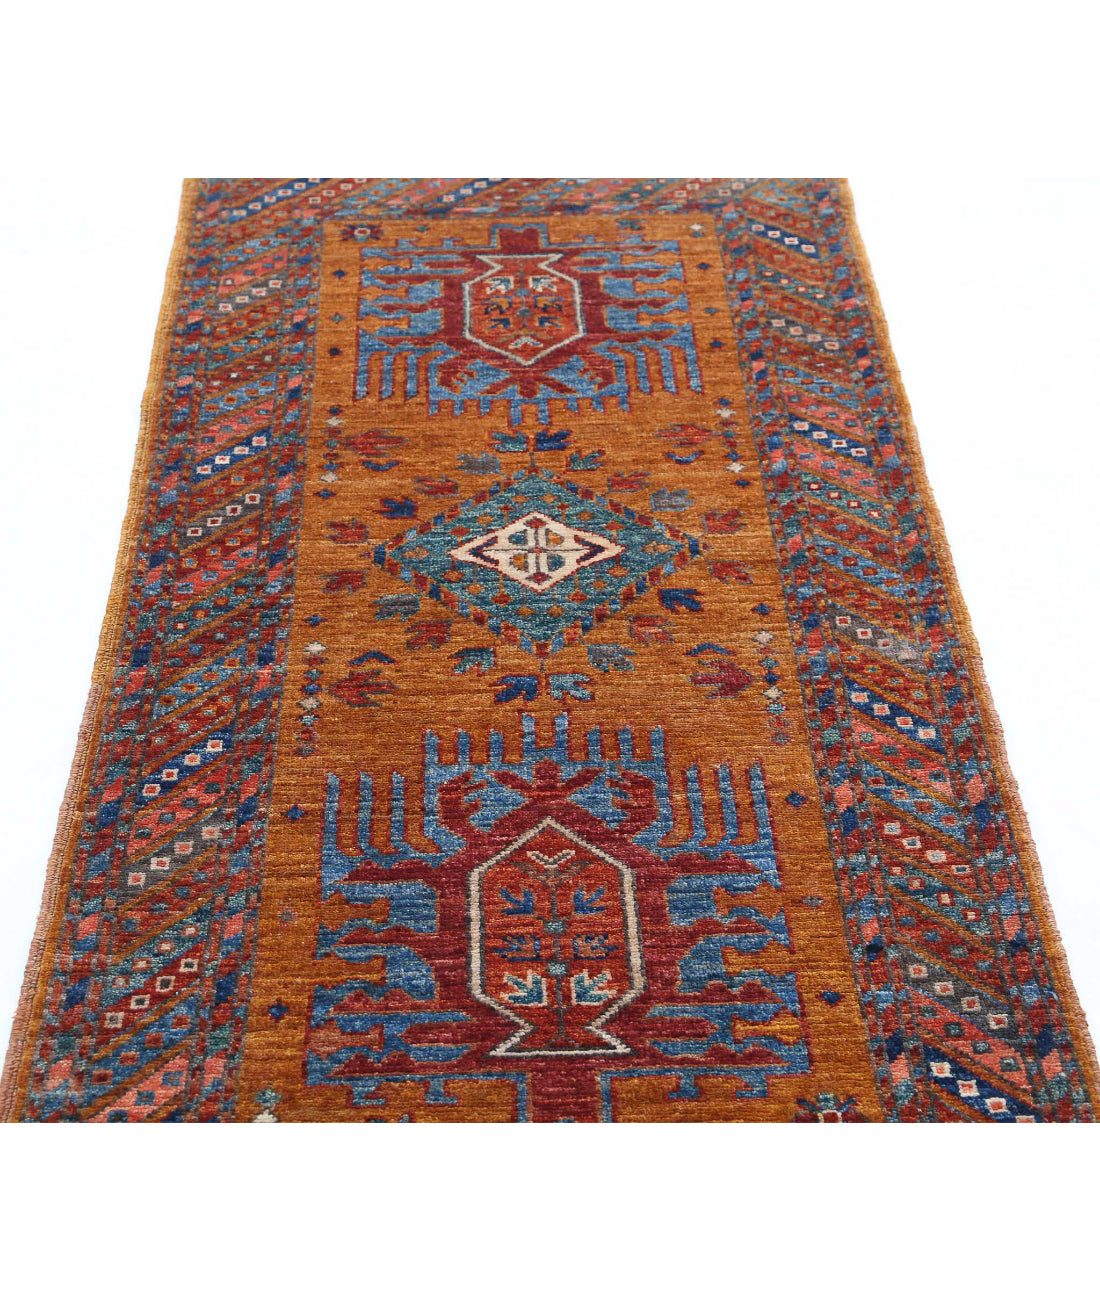 Hand Knotted Nomadic Caucasian Humna Wool Rug - 2'7'' x 5'10'' 2'7'' x 5'10'' (78 X 175) / Gold / Multi